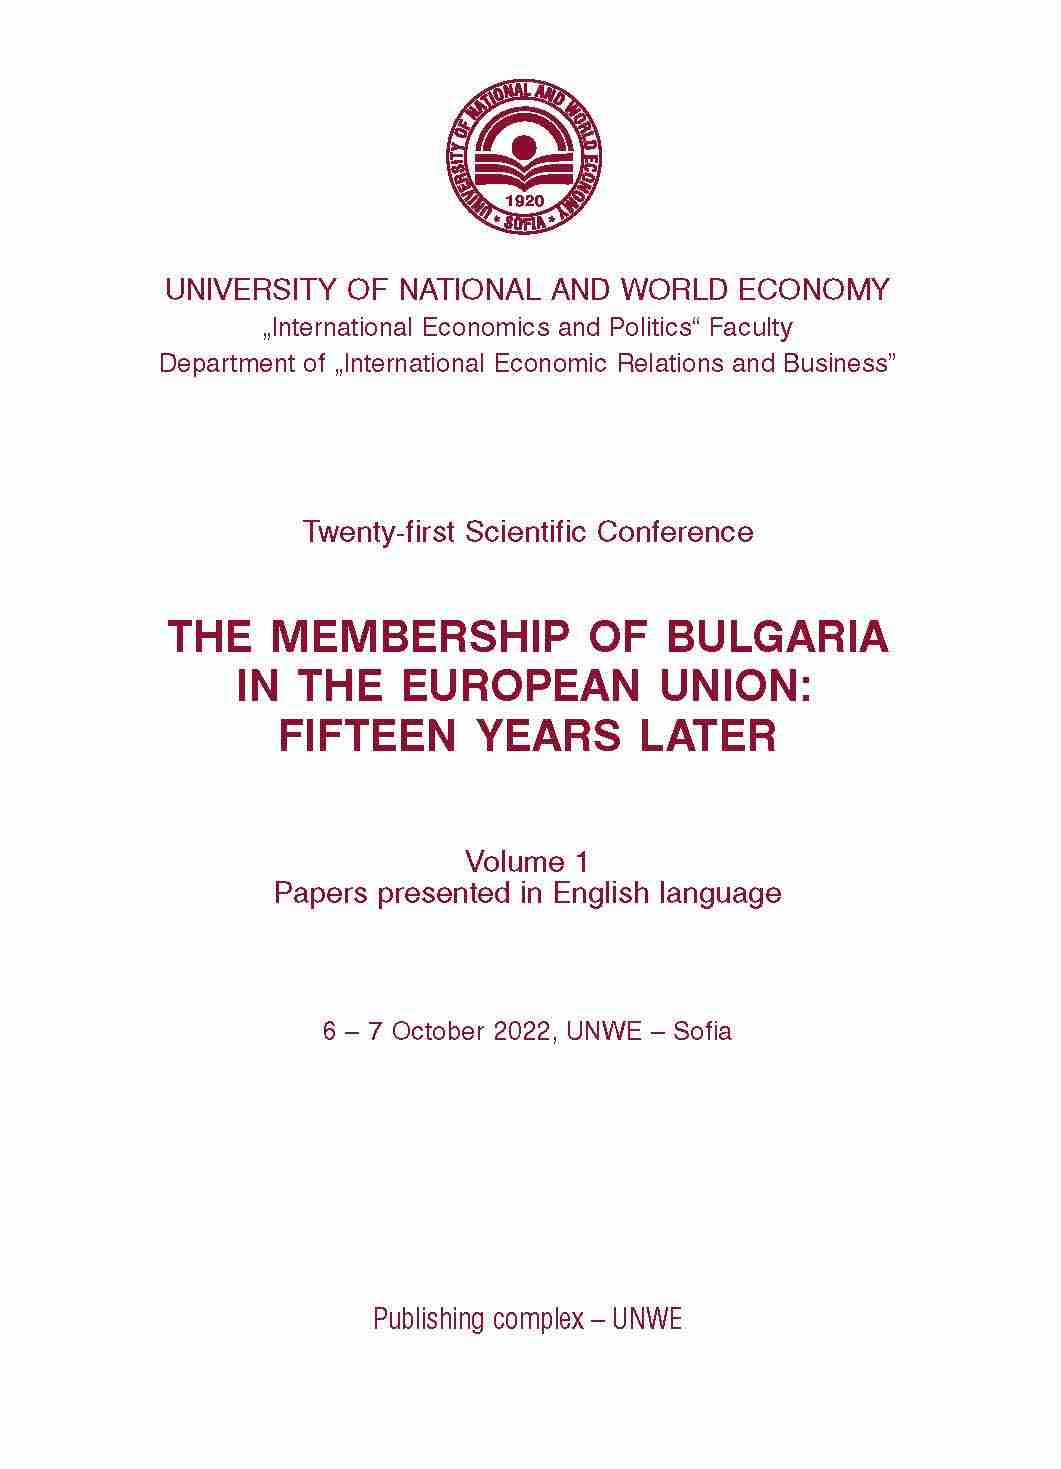 Competitiveness of Bulgarian Economy – Comparison with Other Member-States of the European Union